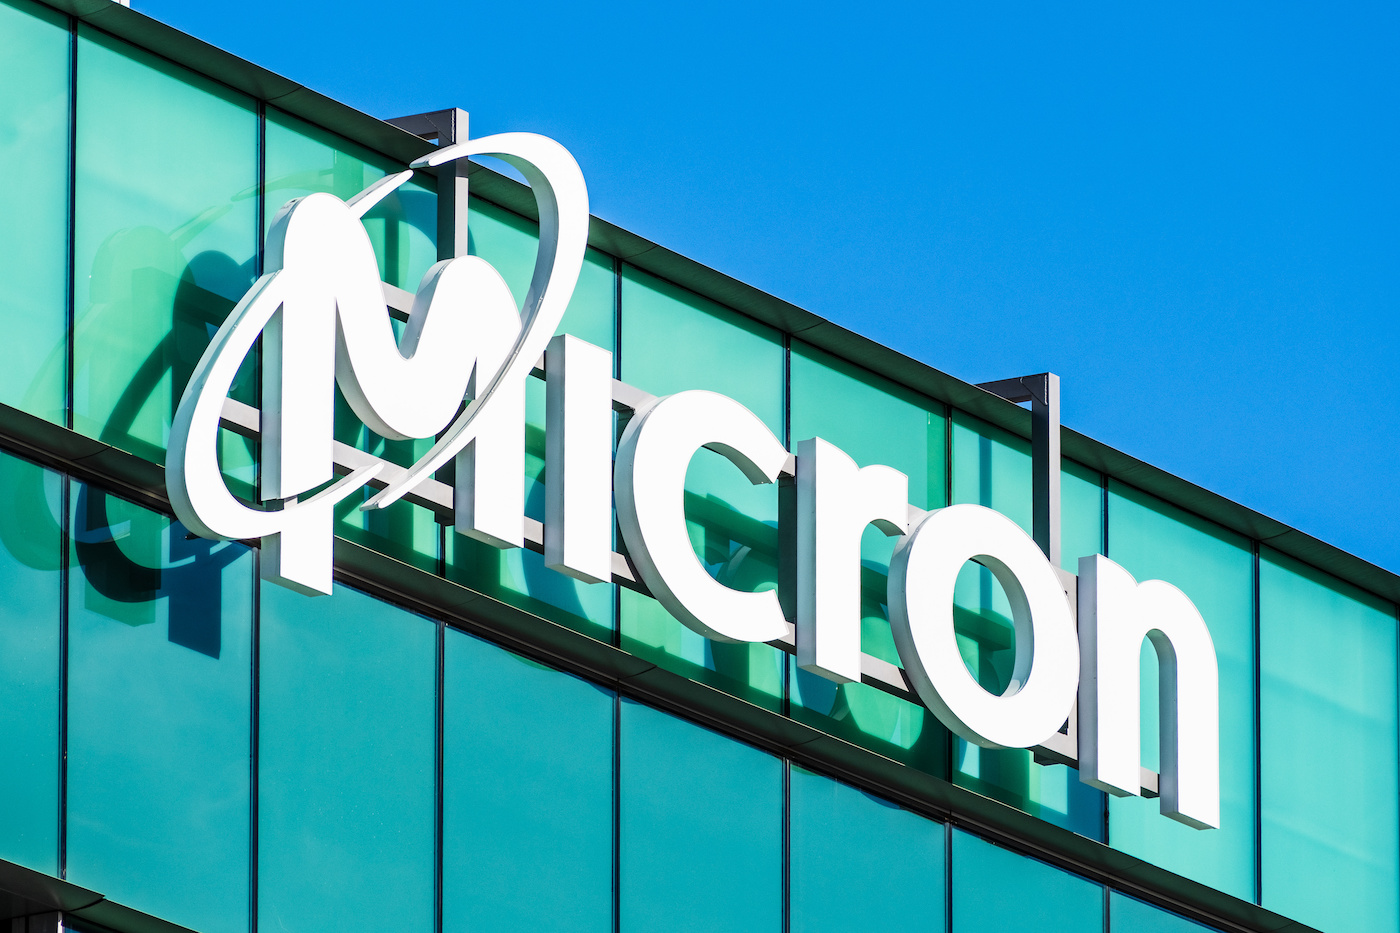 Micron (MU) Q1 2023 Earnings: What to Expect